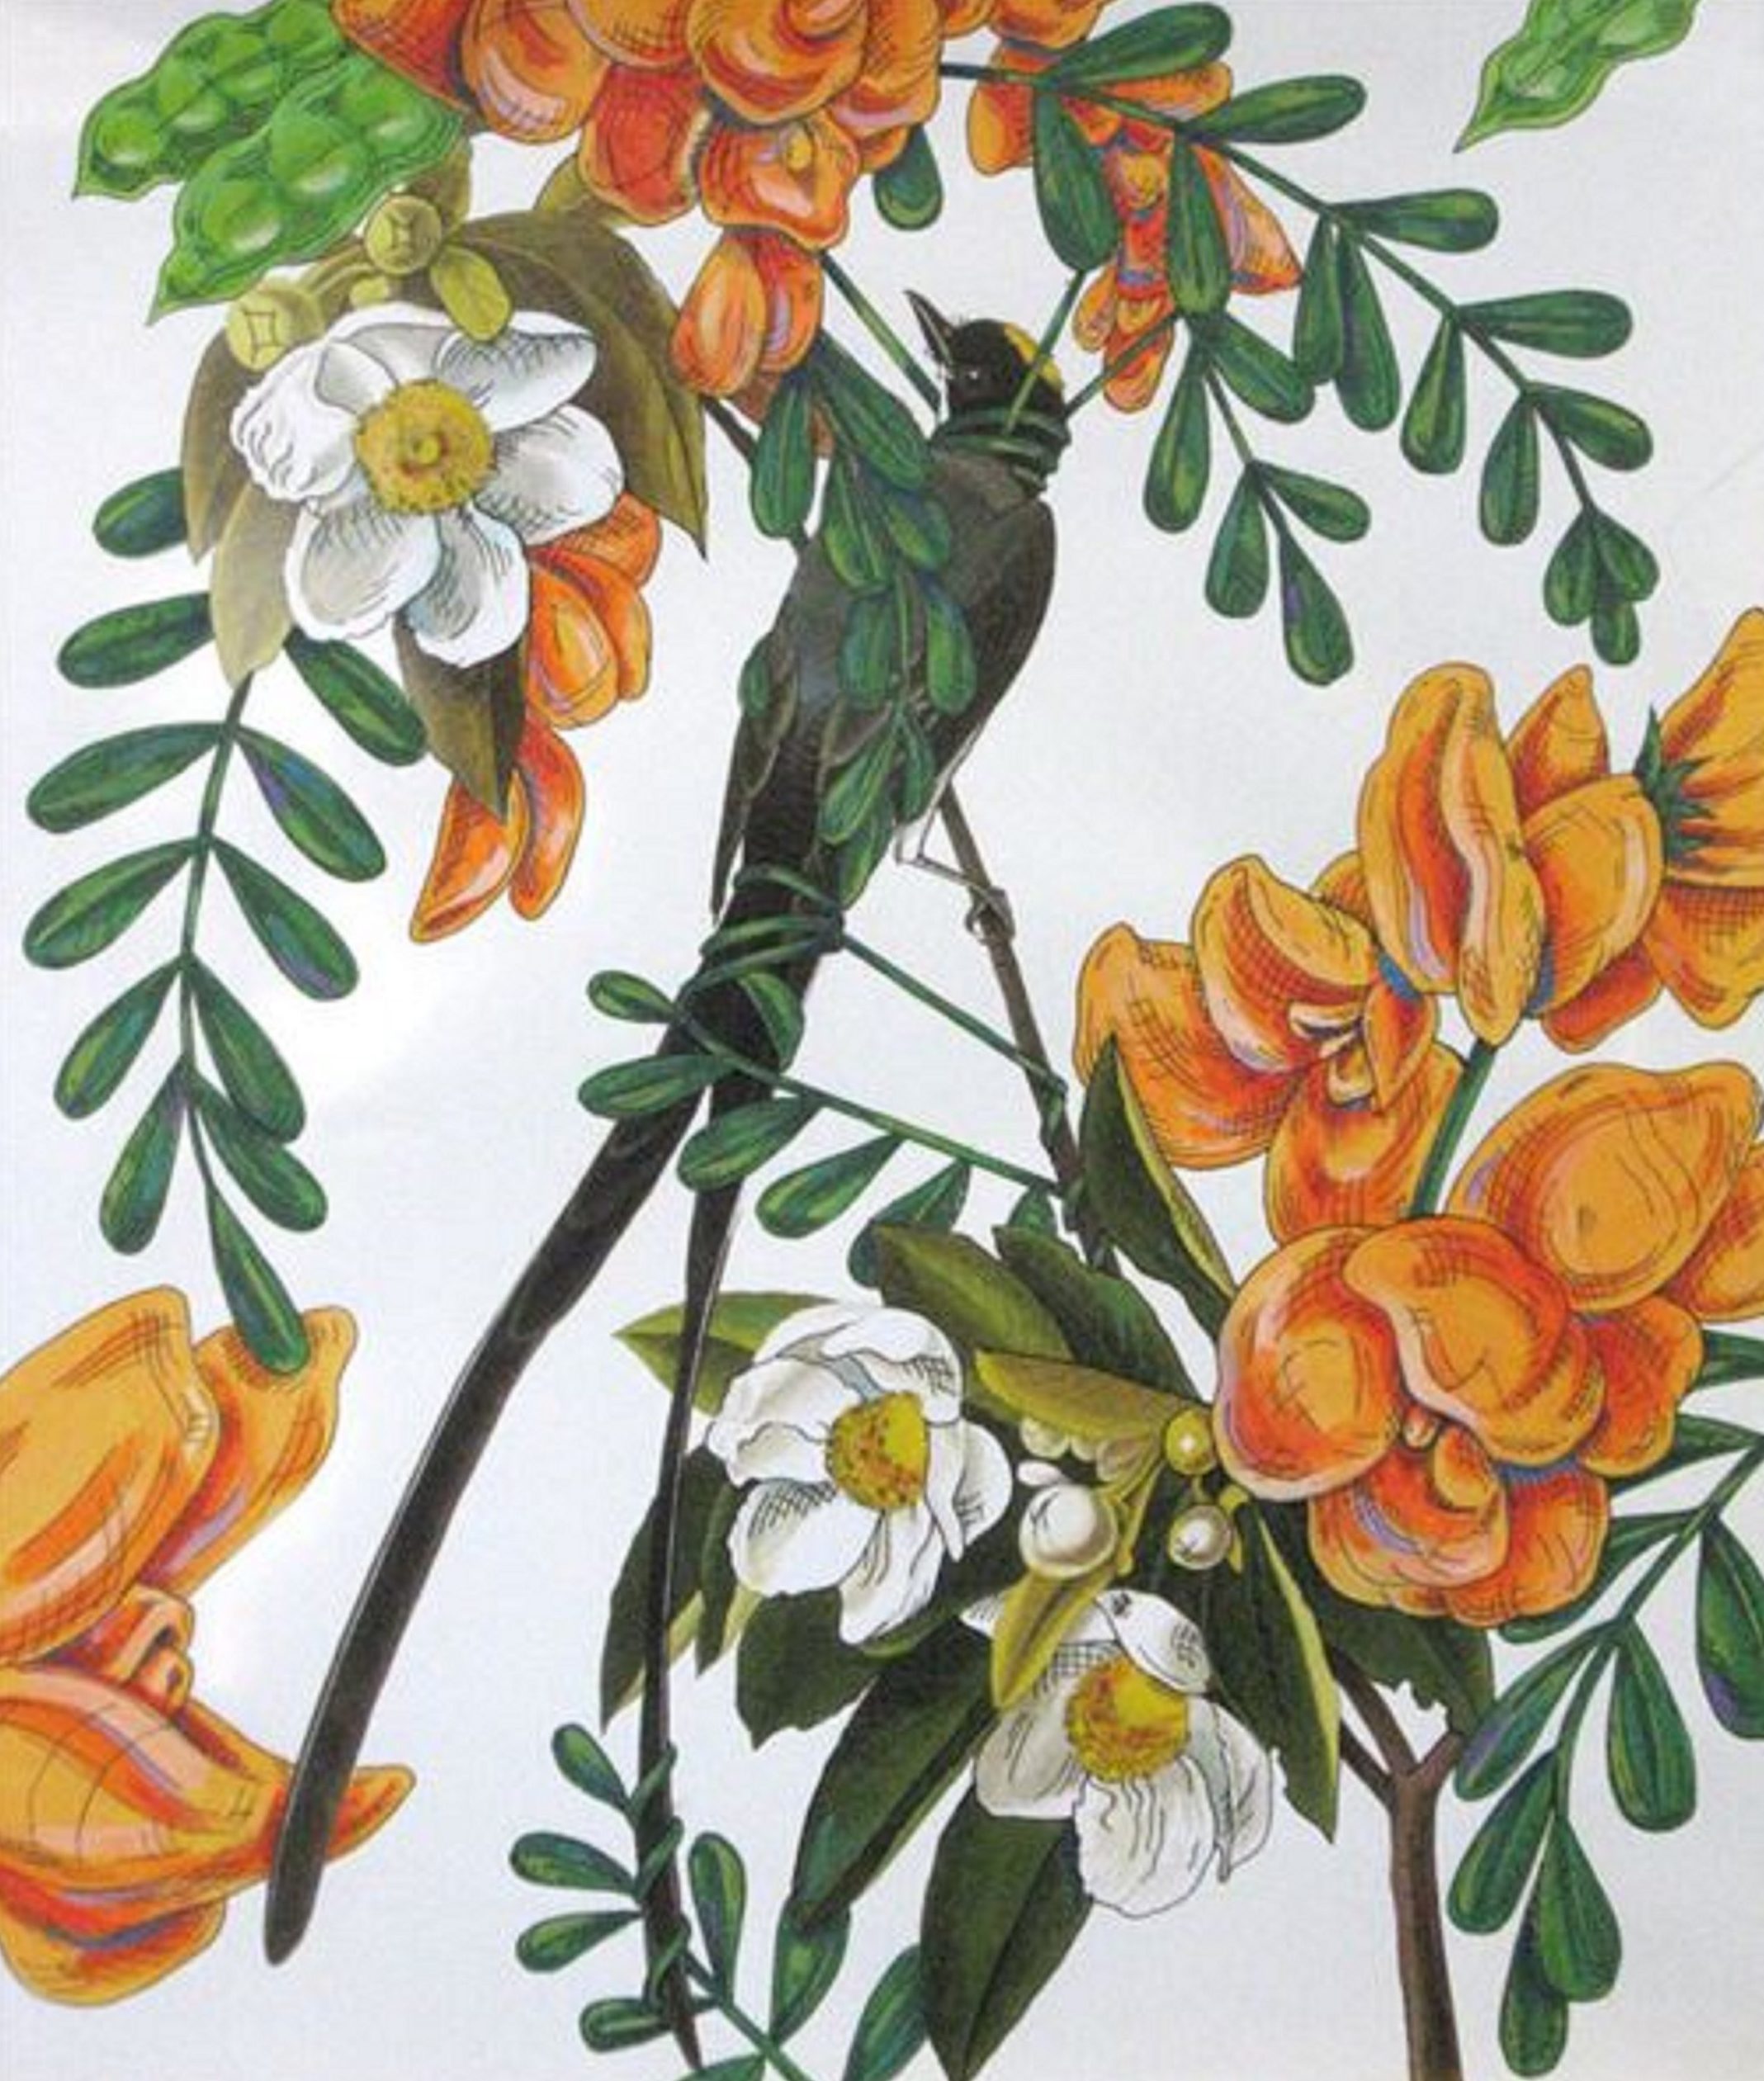 

											Penelope Gottlieb</b>

											<em>
												Penelope Gottlieb  New Works</em> 

											<h4>
												June 25 - July 24, 2021											</h4>

		                																																<i>Sesbania punicea,</i>  
																																																					acrylic and ink over a digital reproduction of an Audubon print, 
																																								13 3/8 x 11 3/8 inches 
																								
		                				